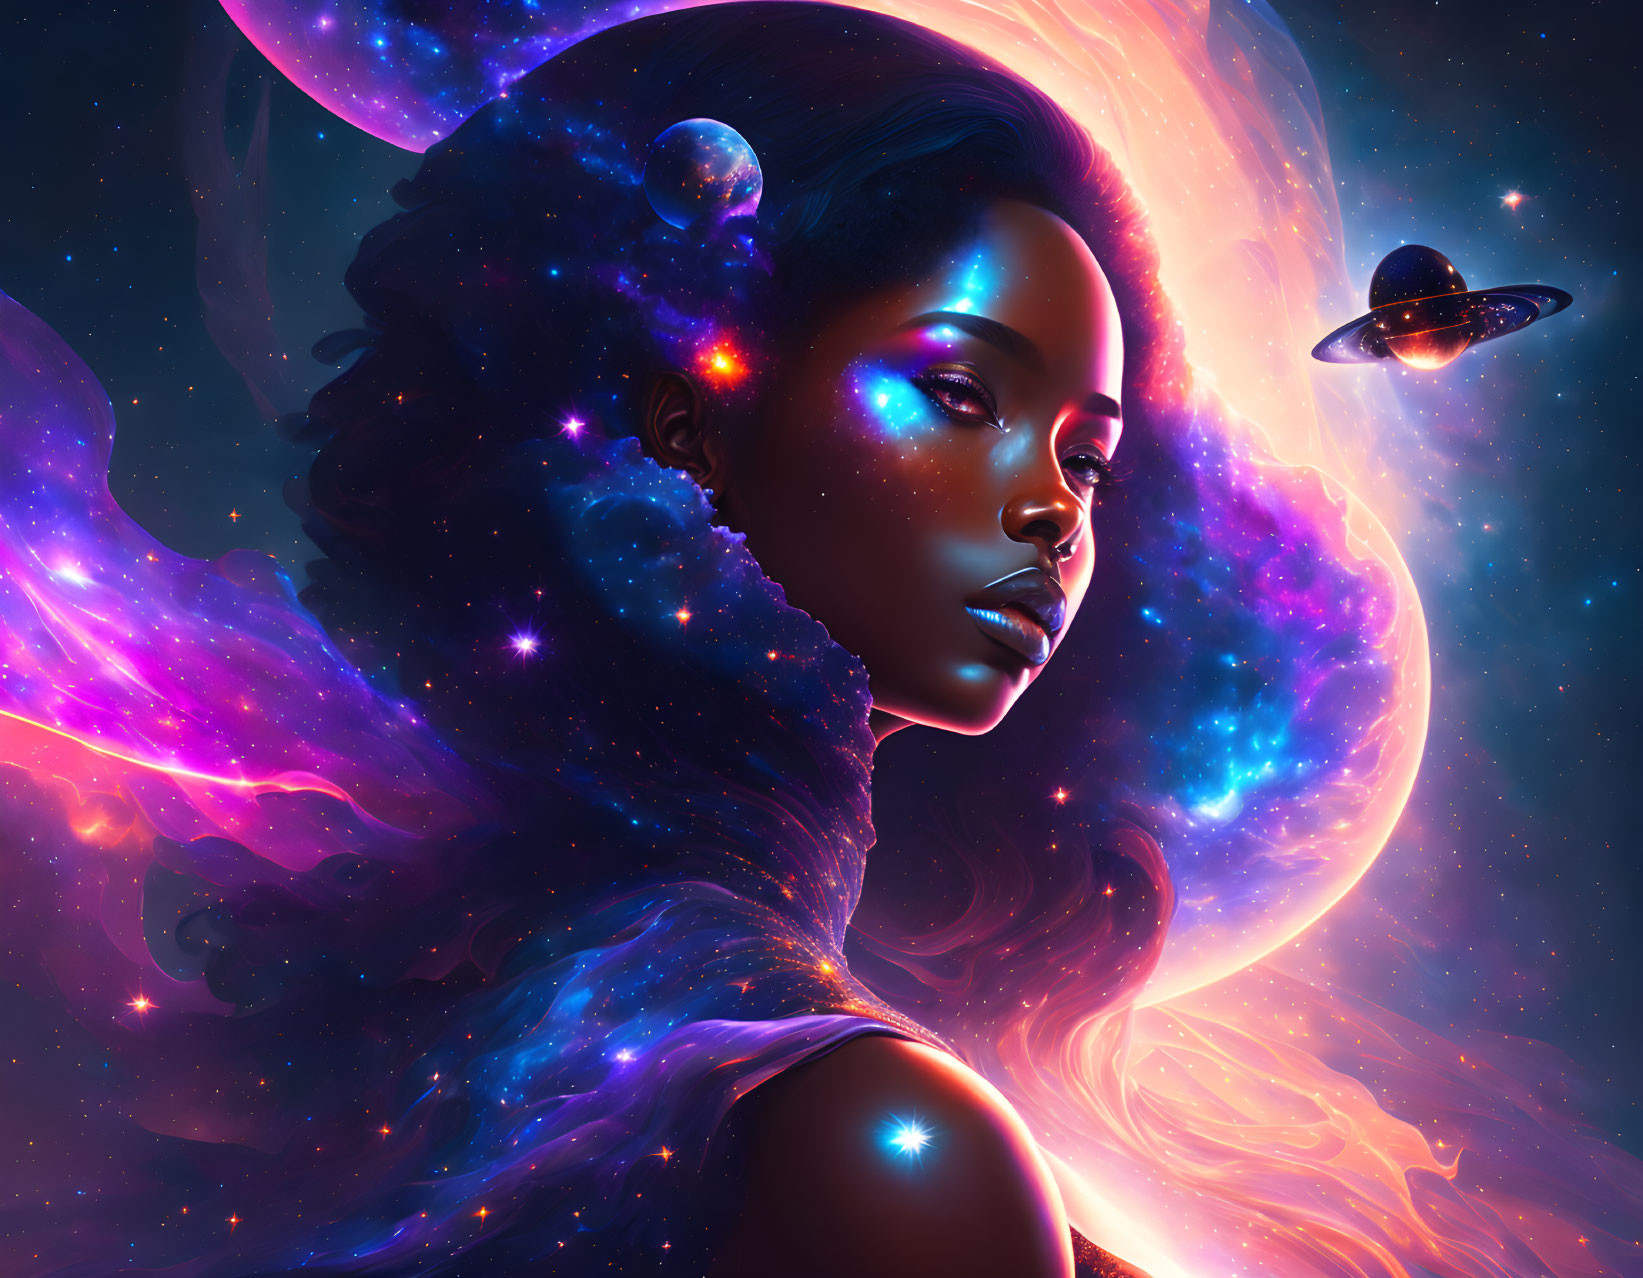 Cosmic-themed digital artwork of a woman with stars and planets against space.